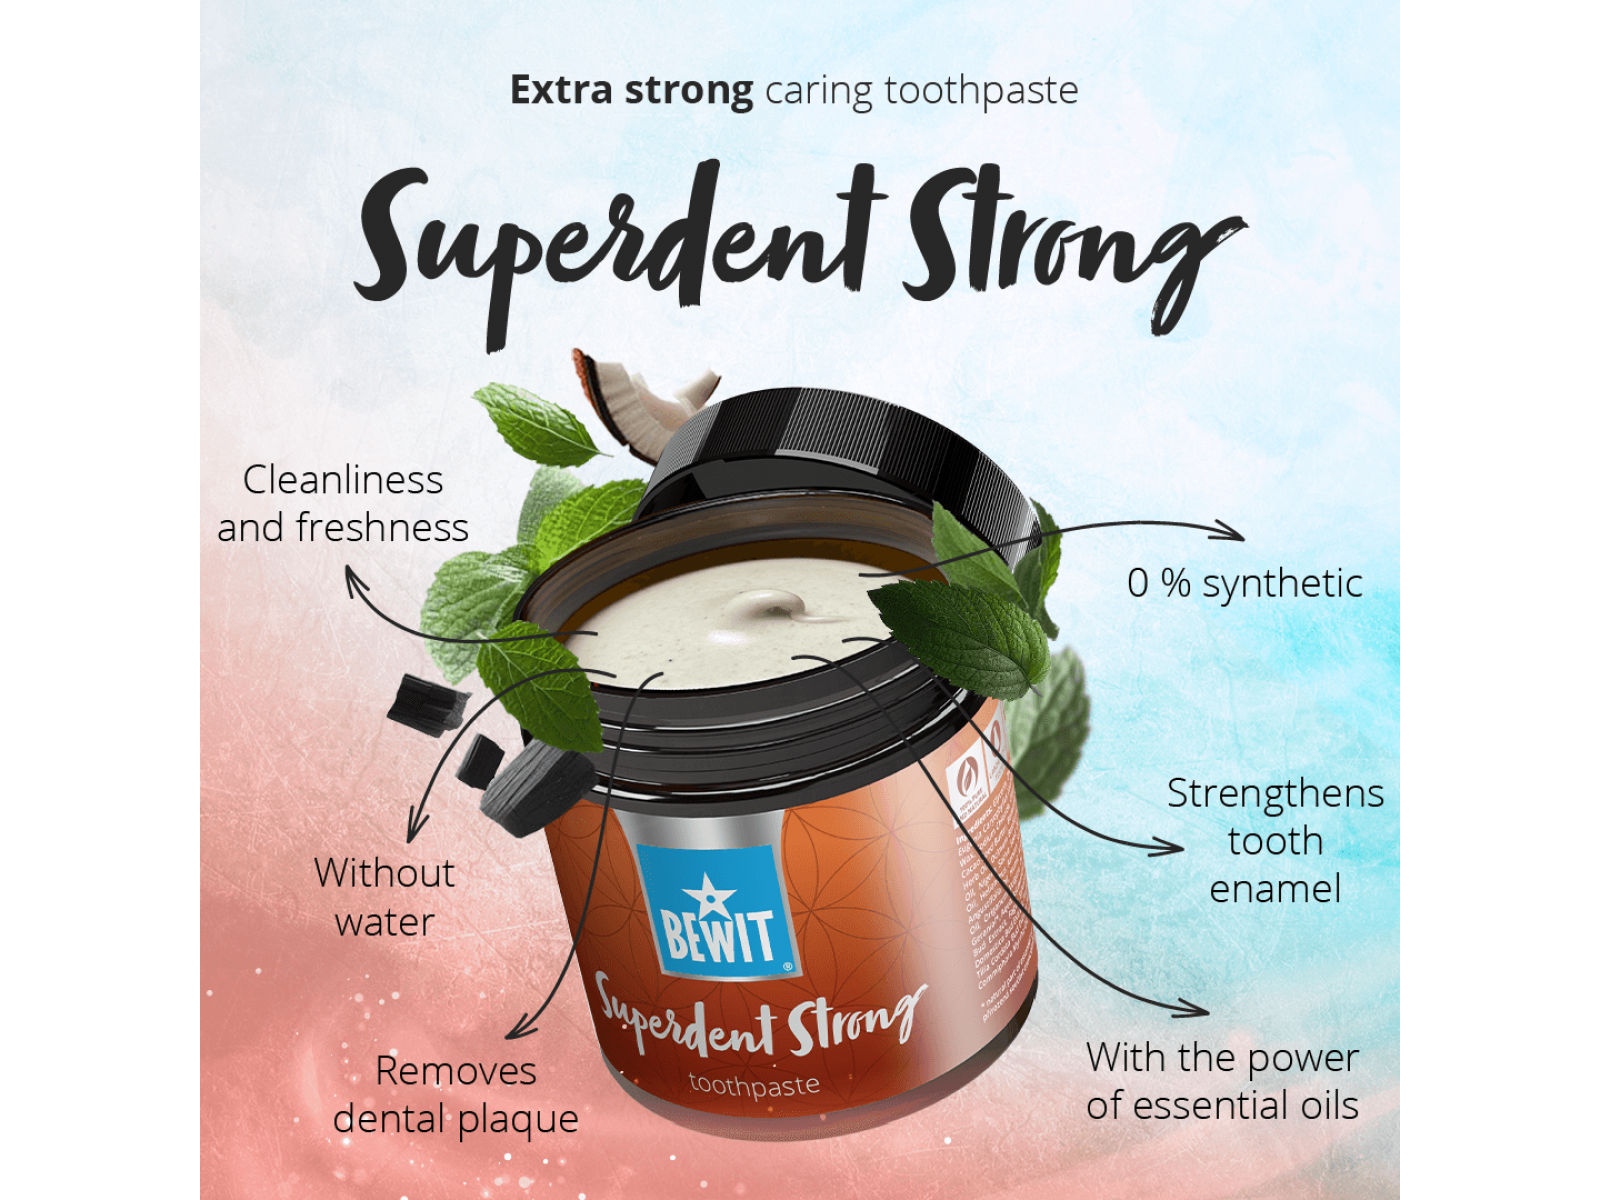 BEWIT Superdent Strong - Extra strong caring toothpaste - 6